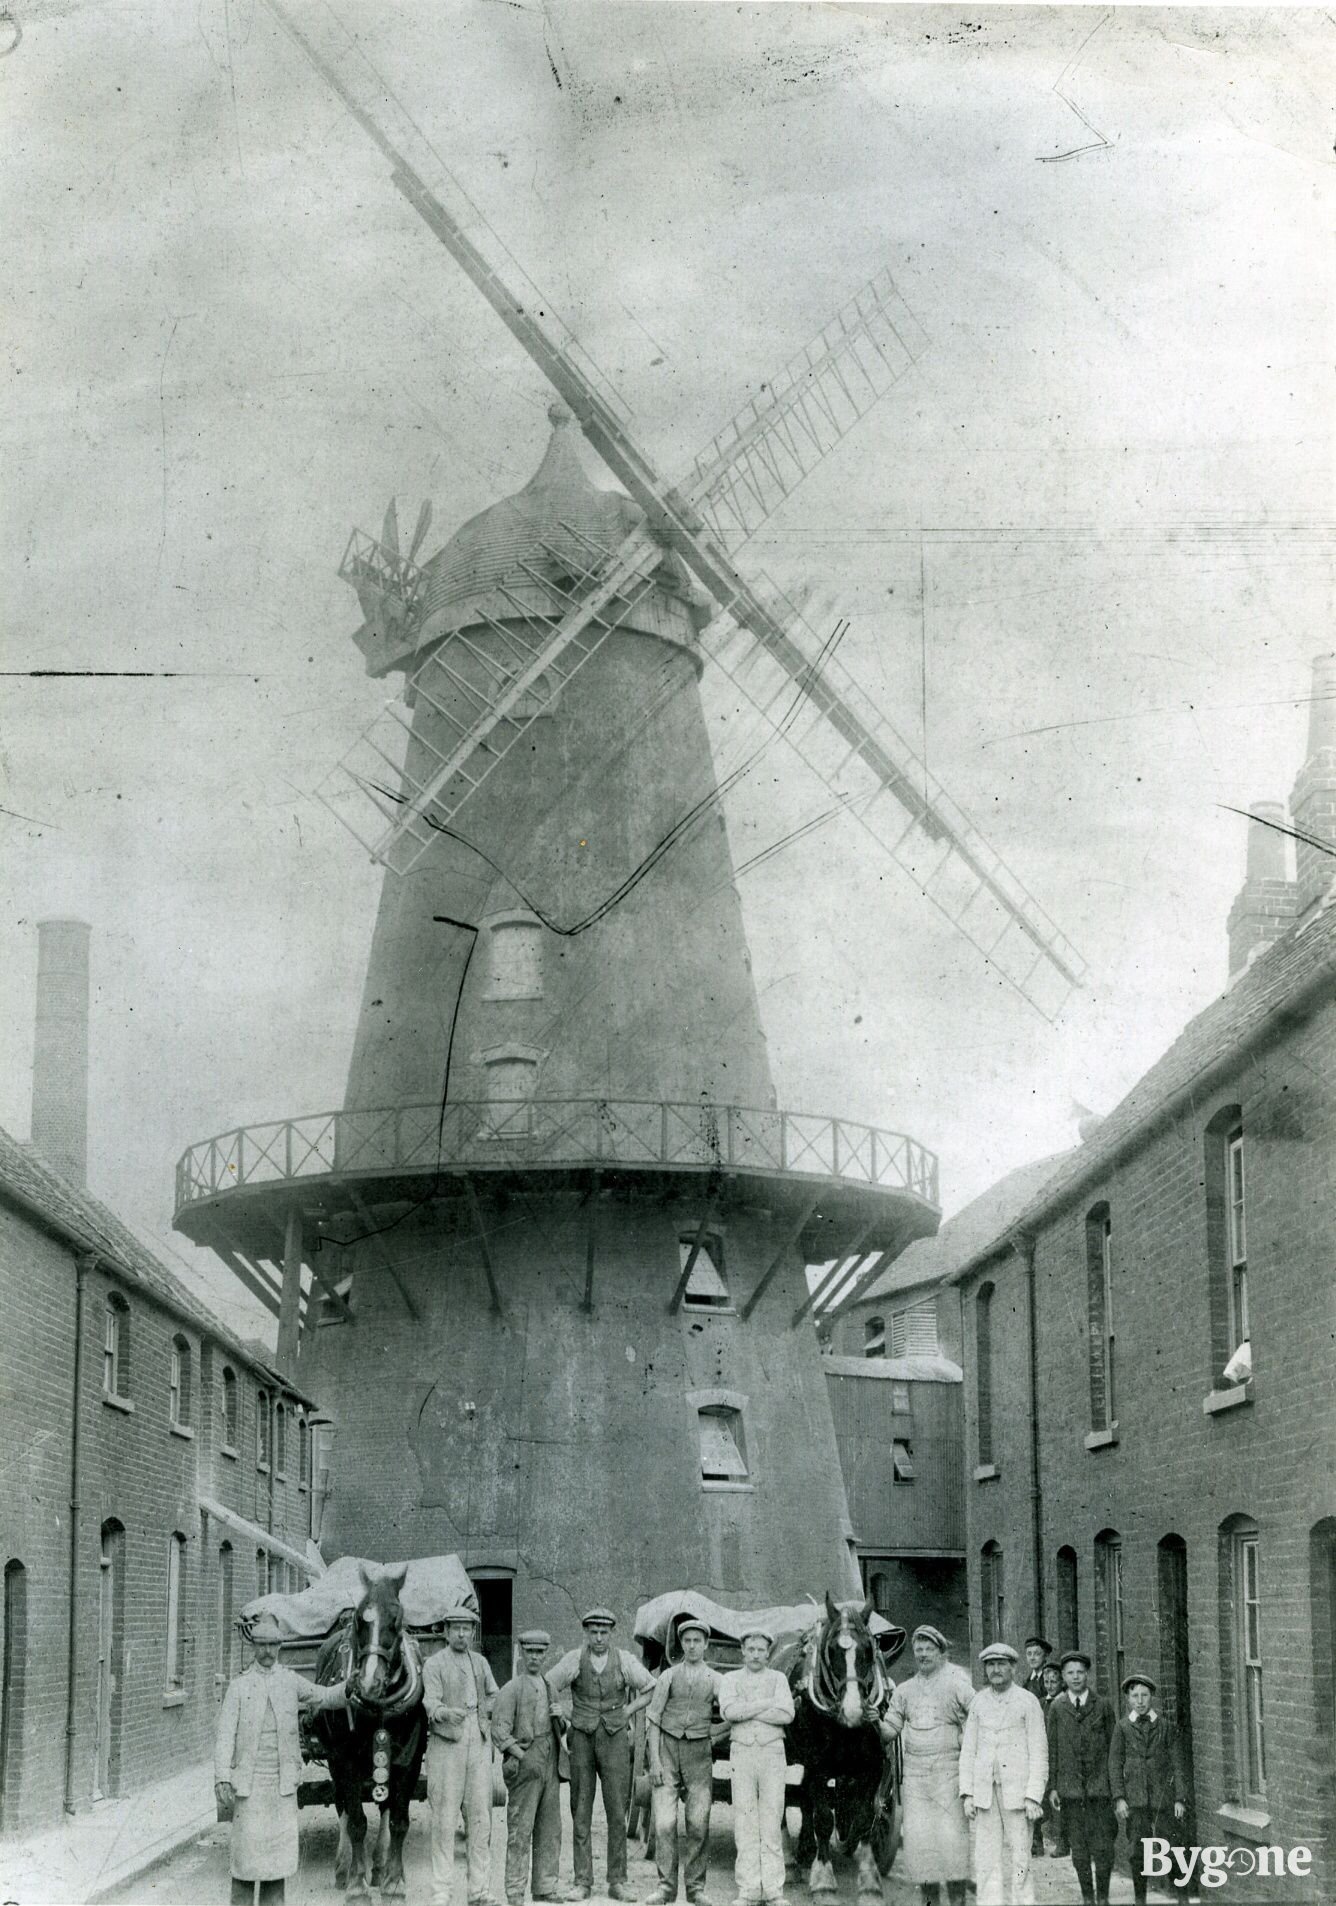 The Old Dock Mill